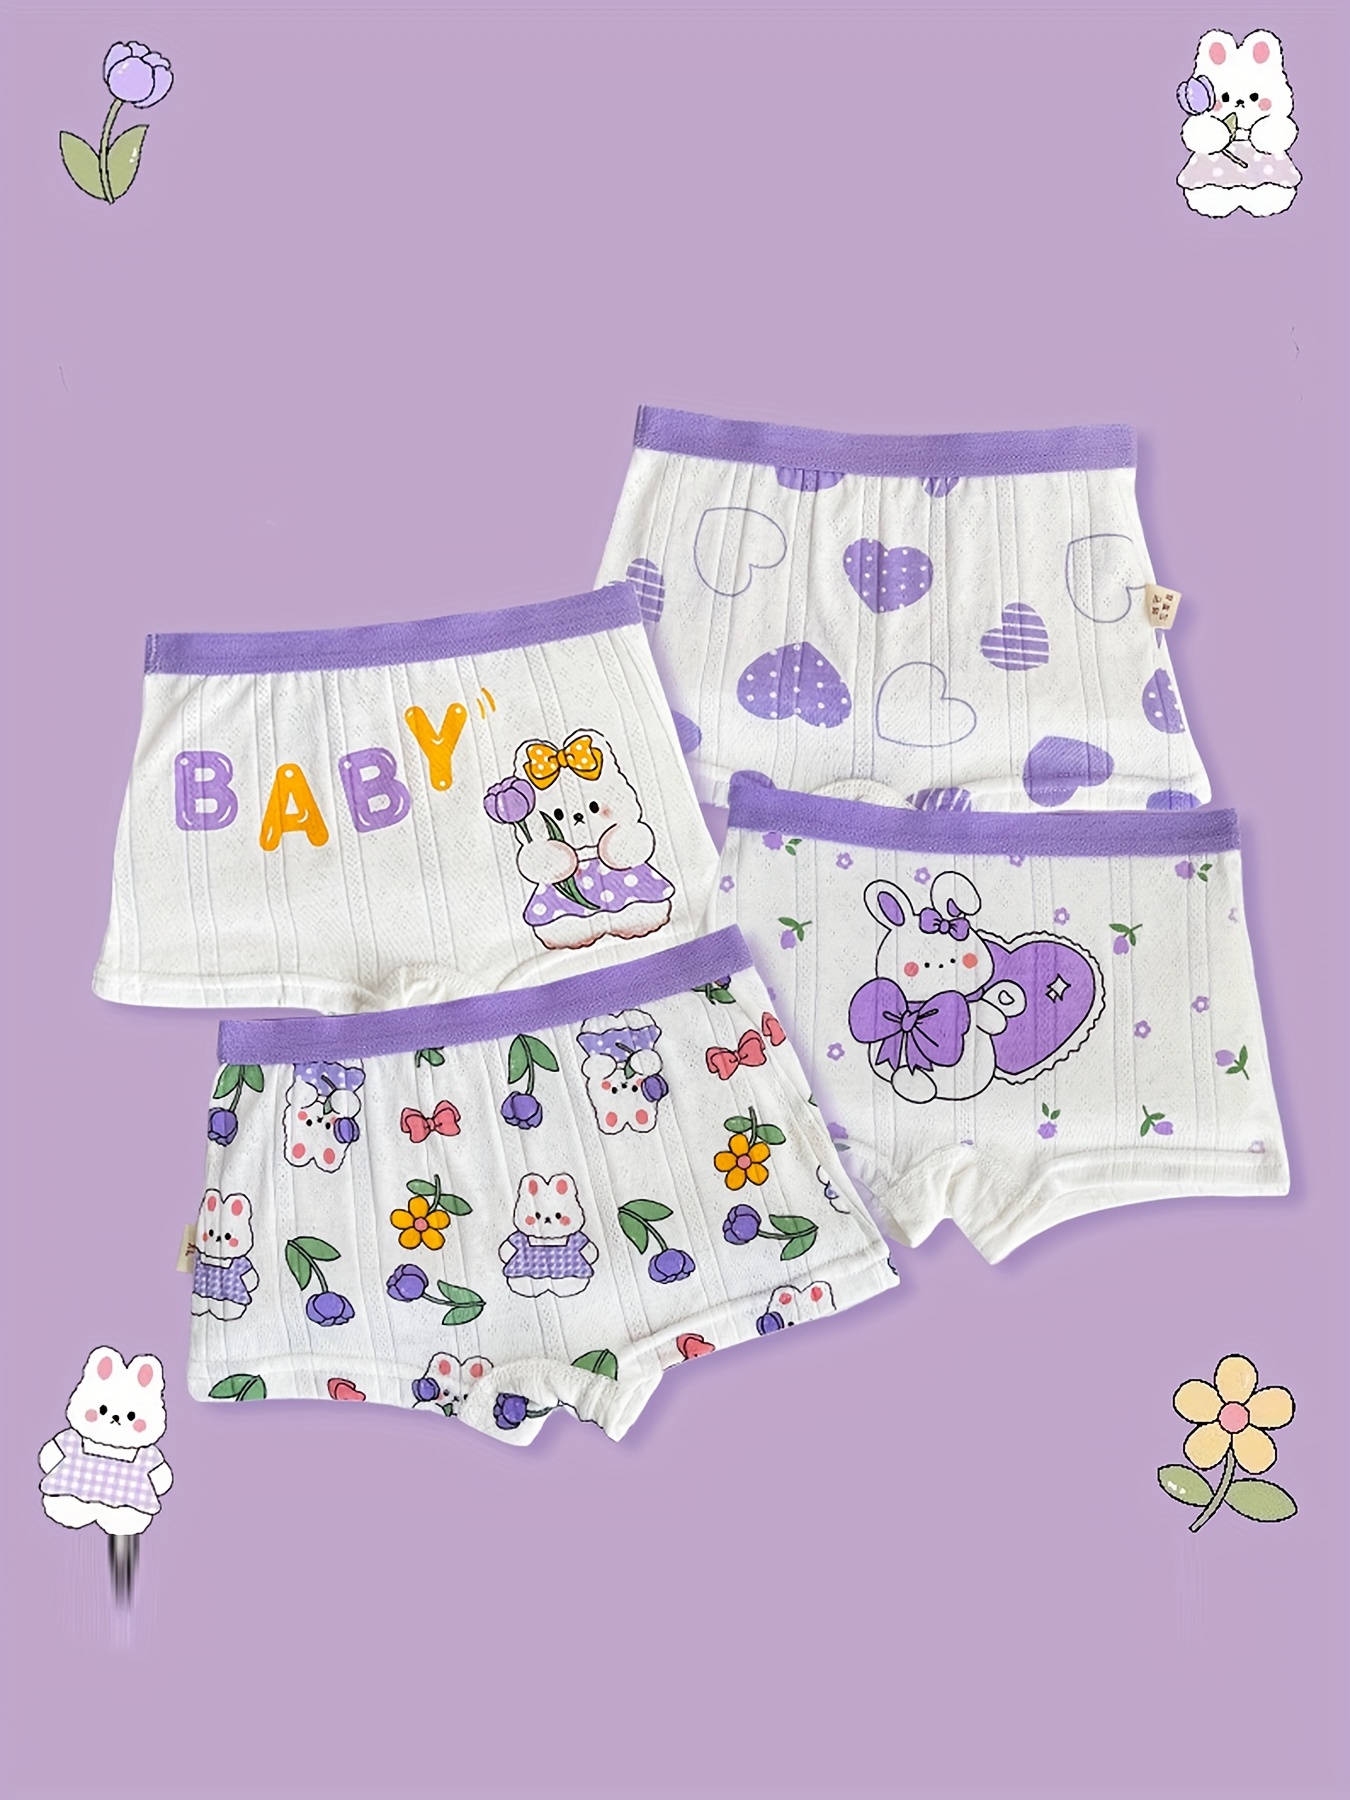 Soft Cotton Cartoon Girl Abdl Briefs For Infants And Teens Short